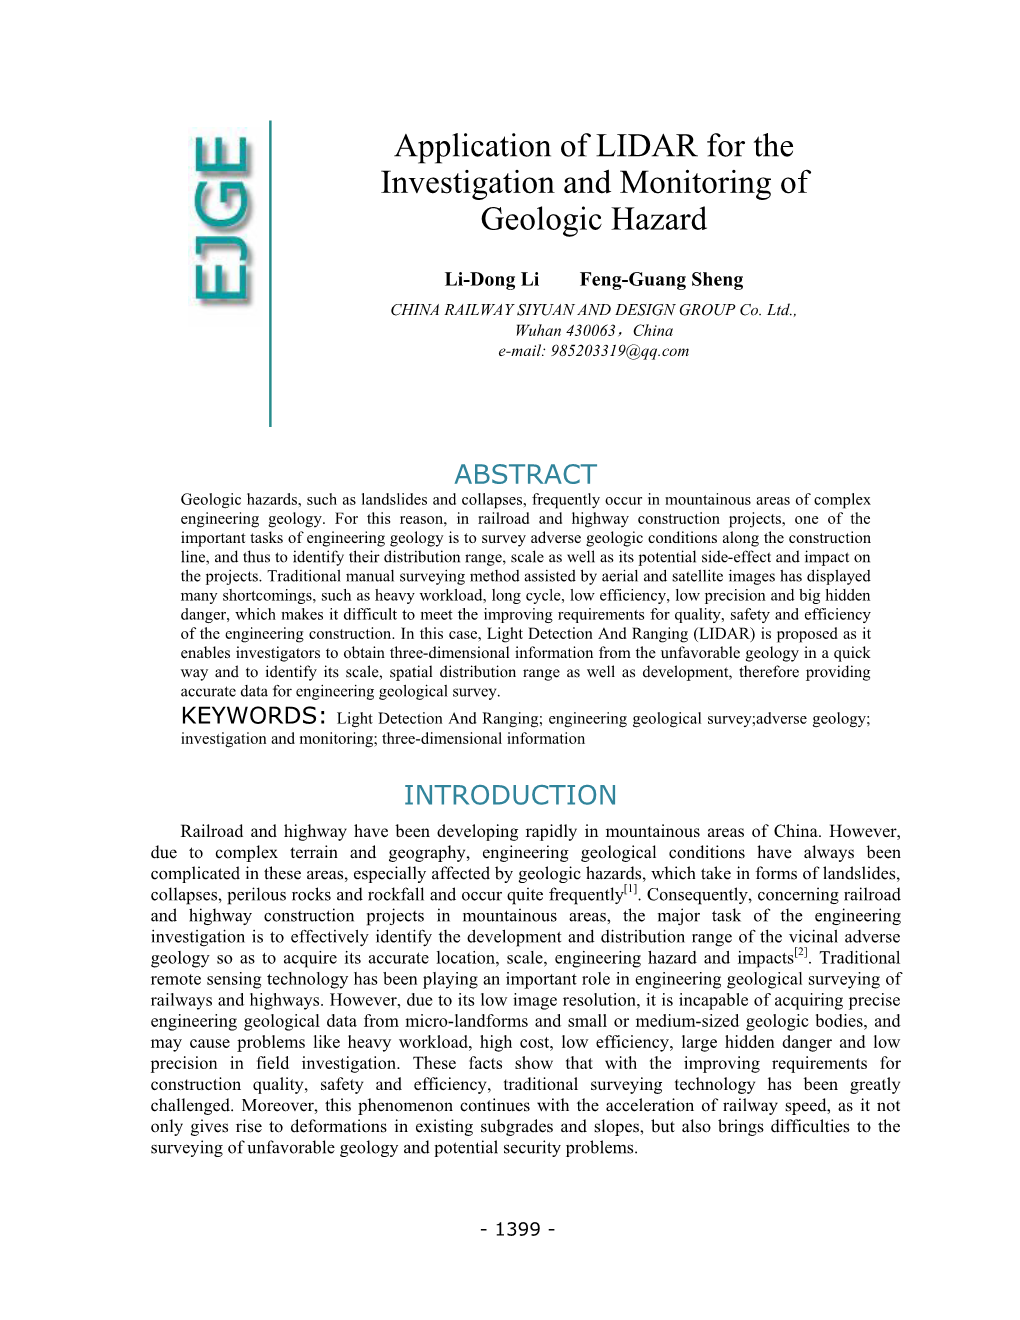 Application of LIDAR for the Investigation and Monitoring of Geologic Hazard